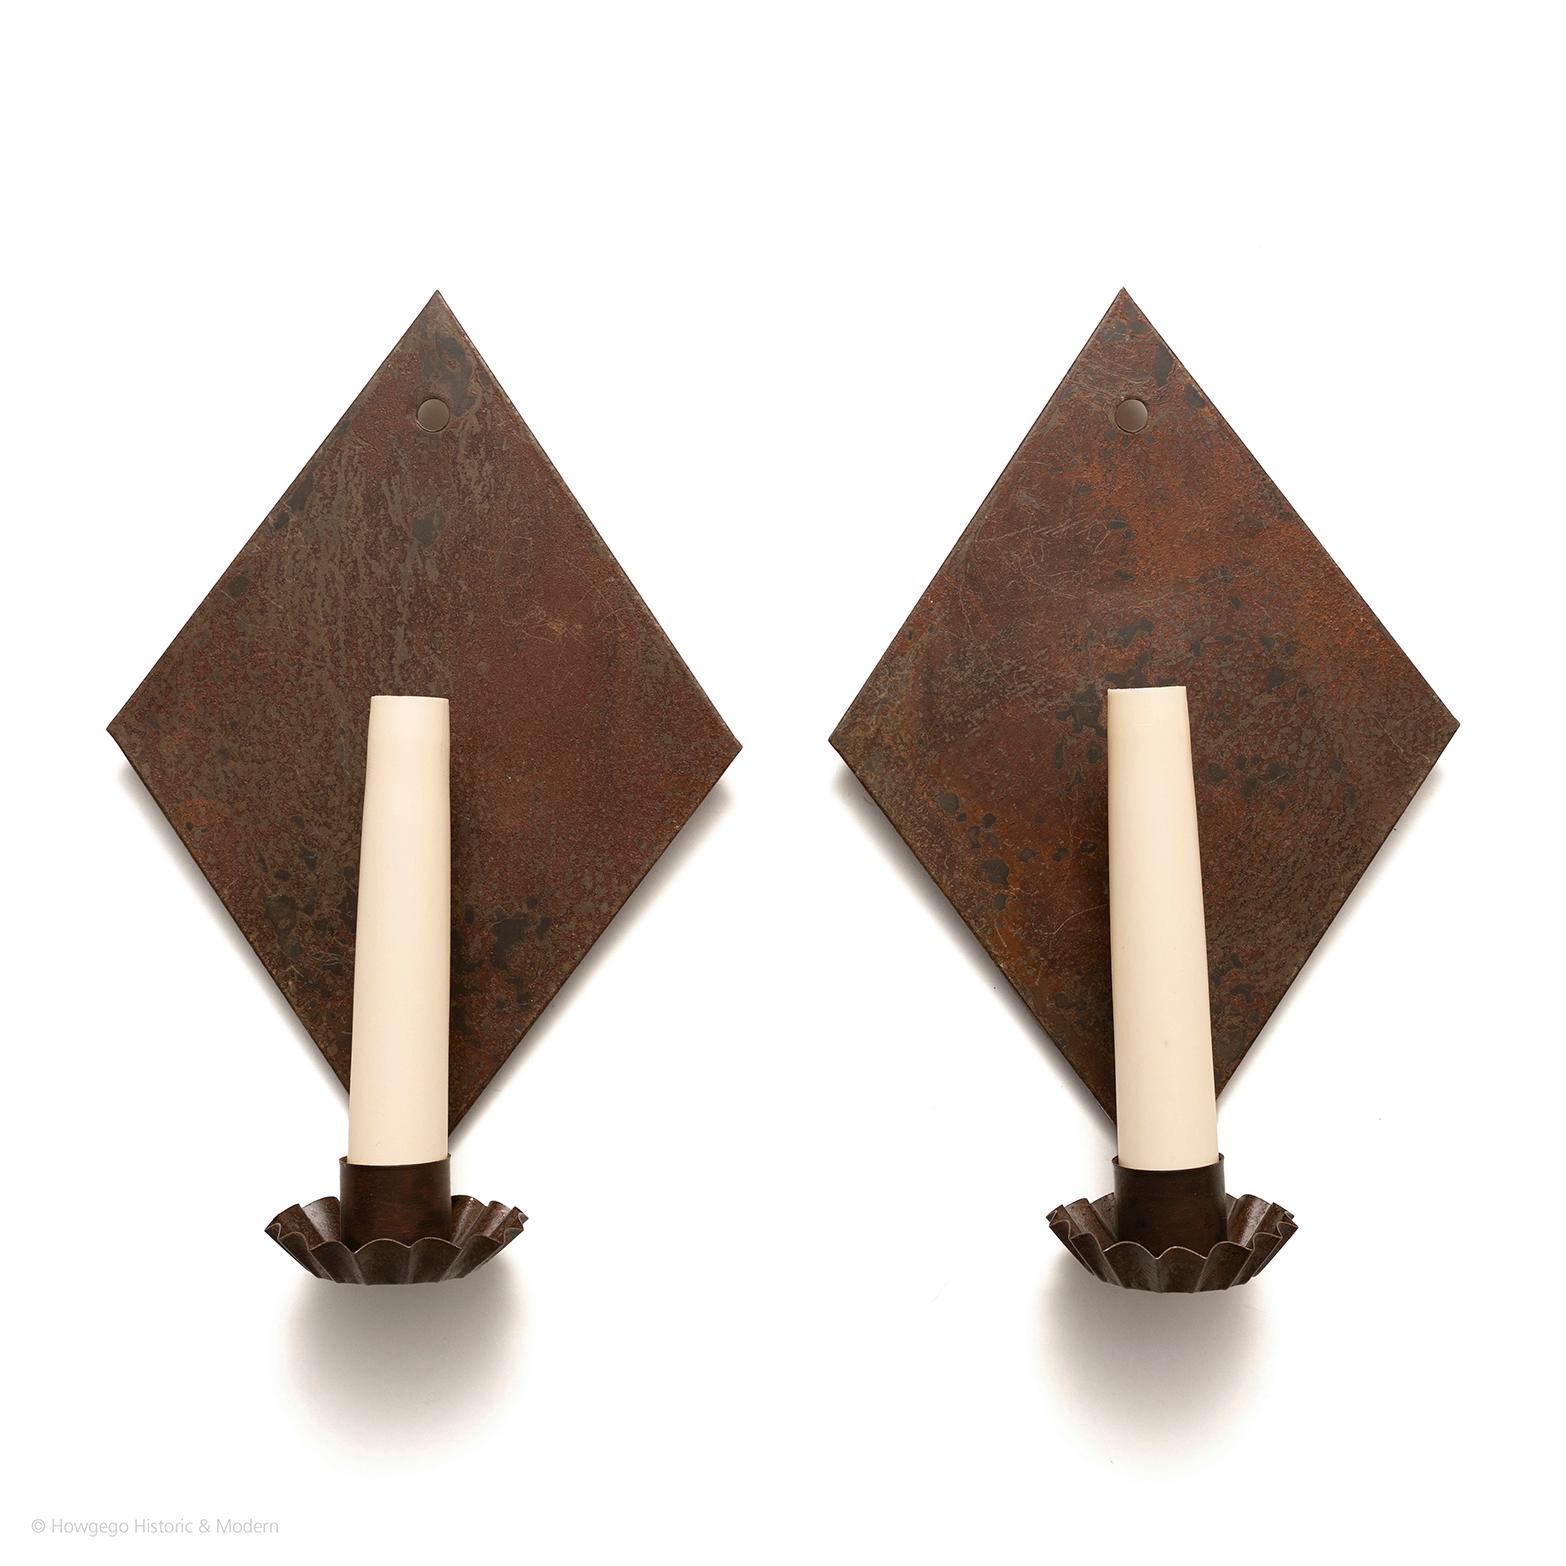 Surviving pieces of vernacular lighting are extremely rare and it is hard to source convincing re-creations. These are copies of a period sconce from the Wallace Nutting Collection and have a plausible antiqued patina.

Pair of diamond shaped,